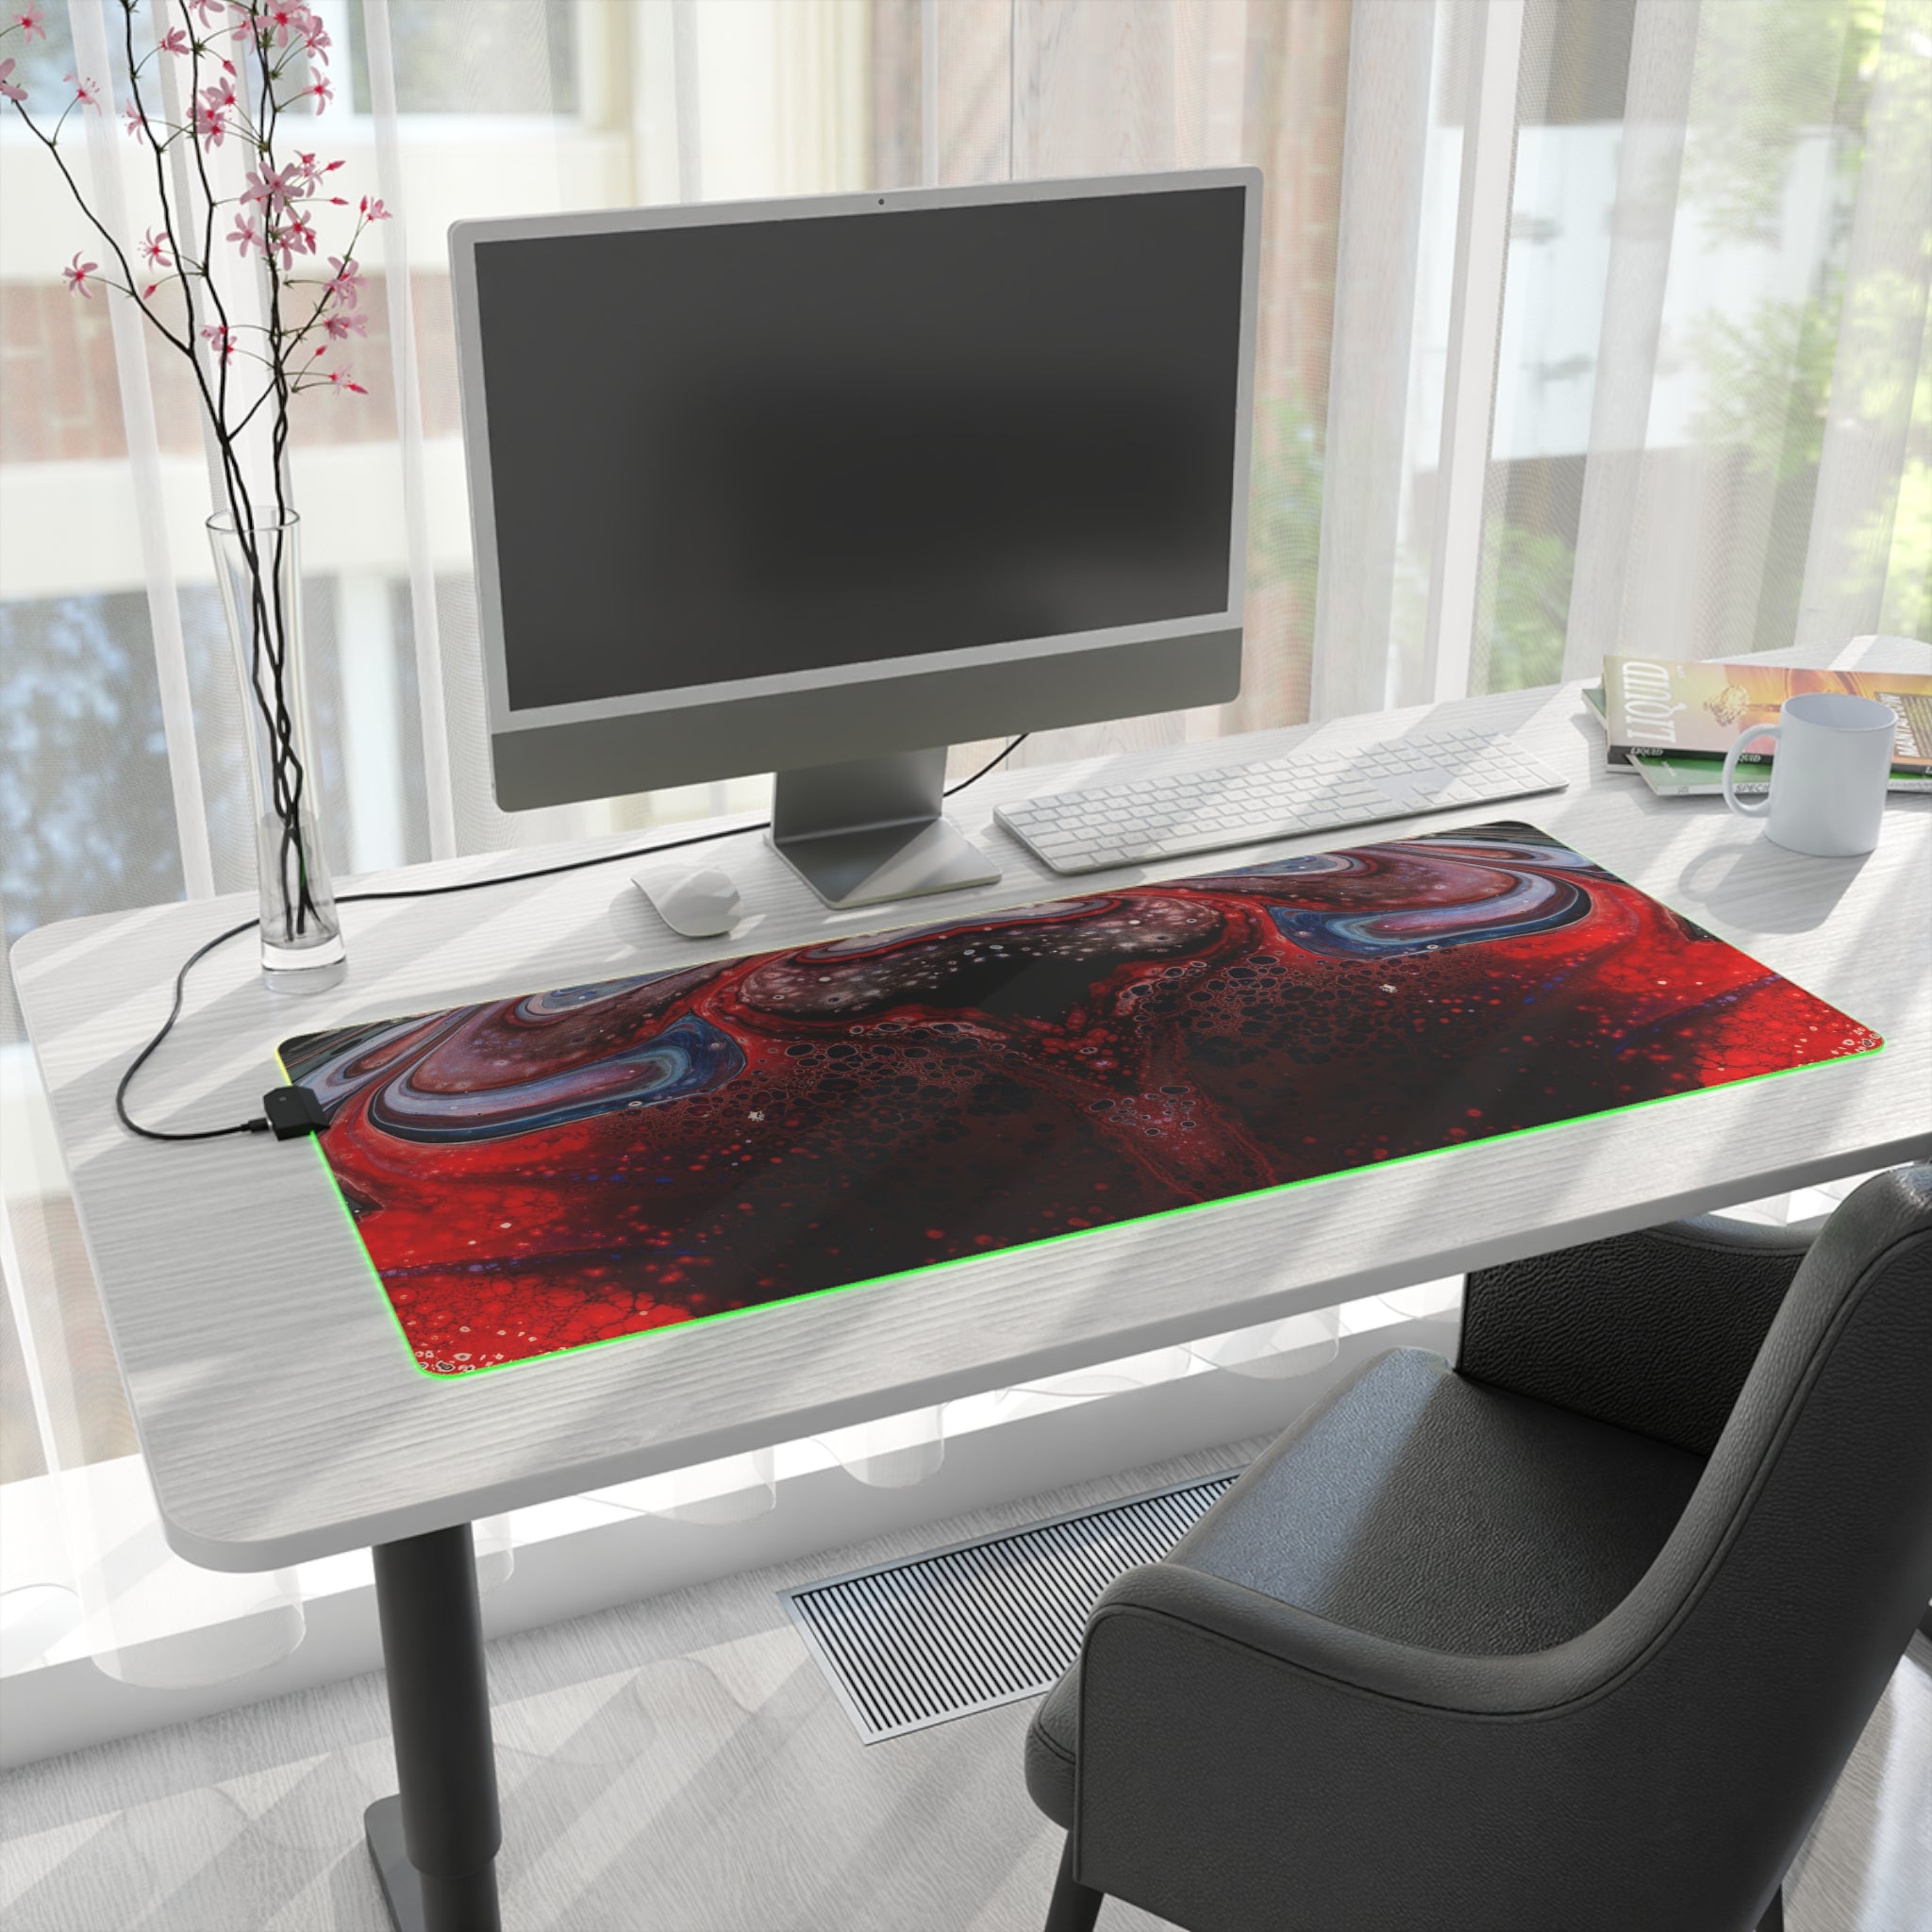 Cameron Creations - LED Gaming Mouse Pad - Window View - 35"x15"